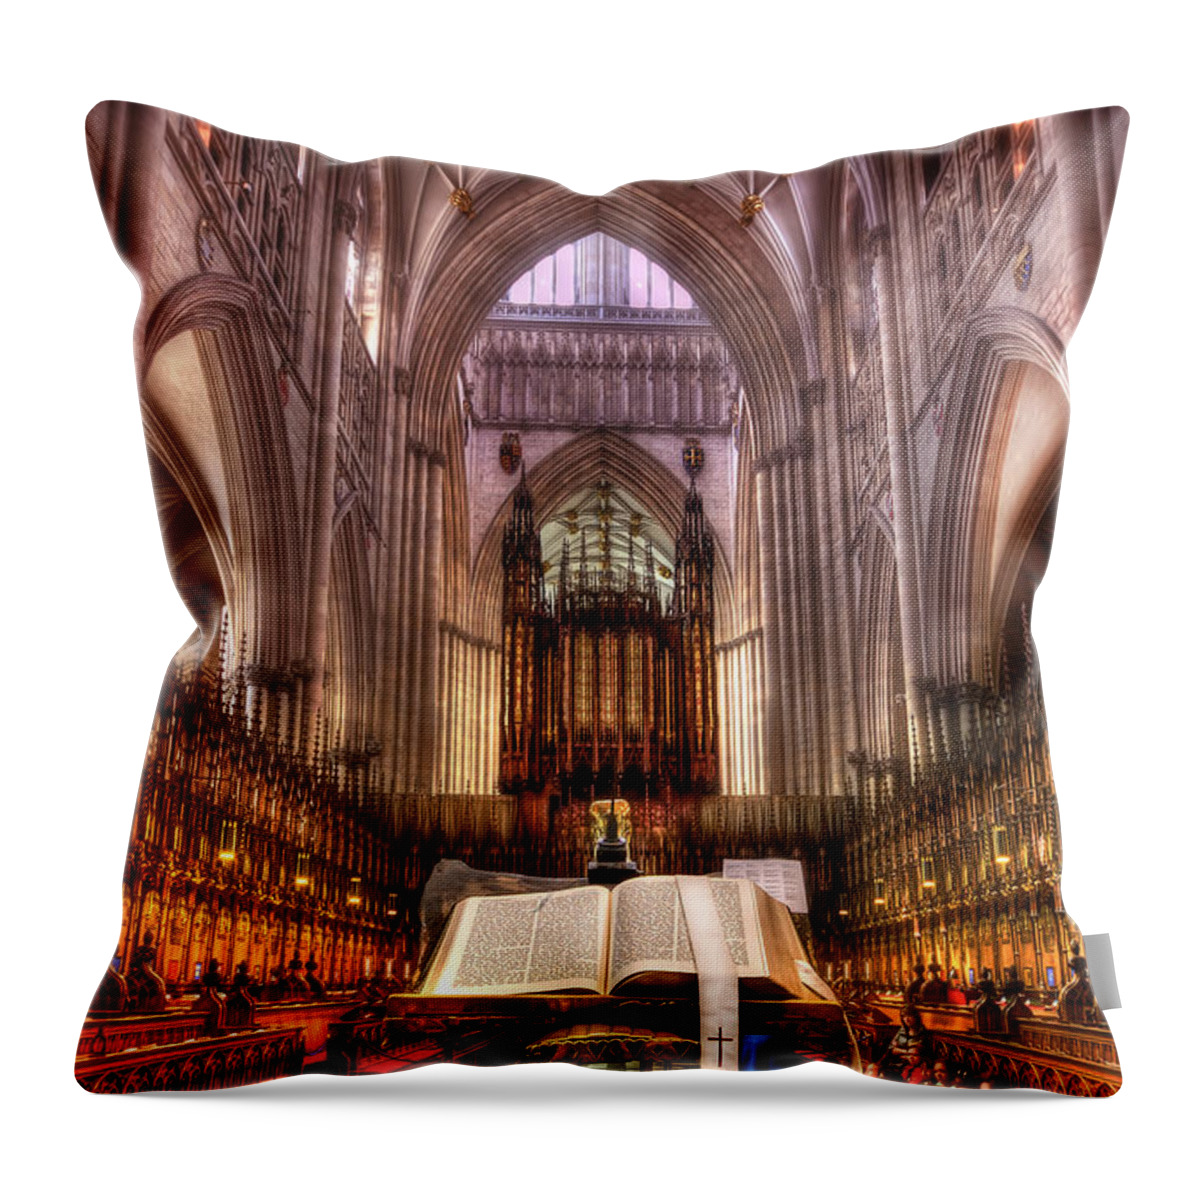 Book Throw Pillow featuring the photograph From What Is Said To When It's Read by Evelina Kremsdorf